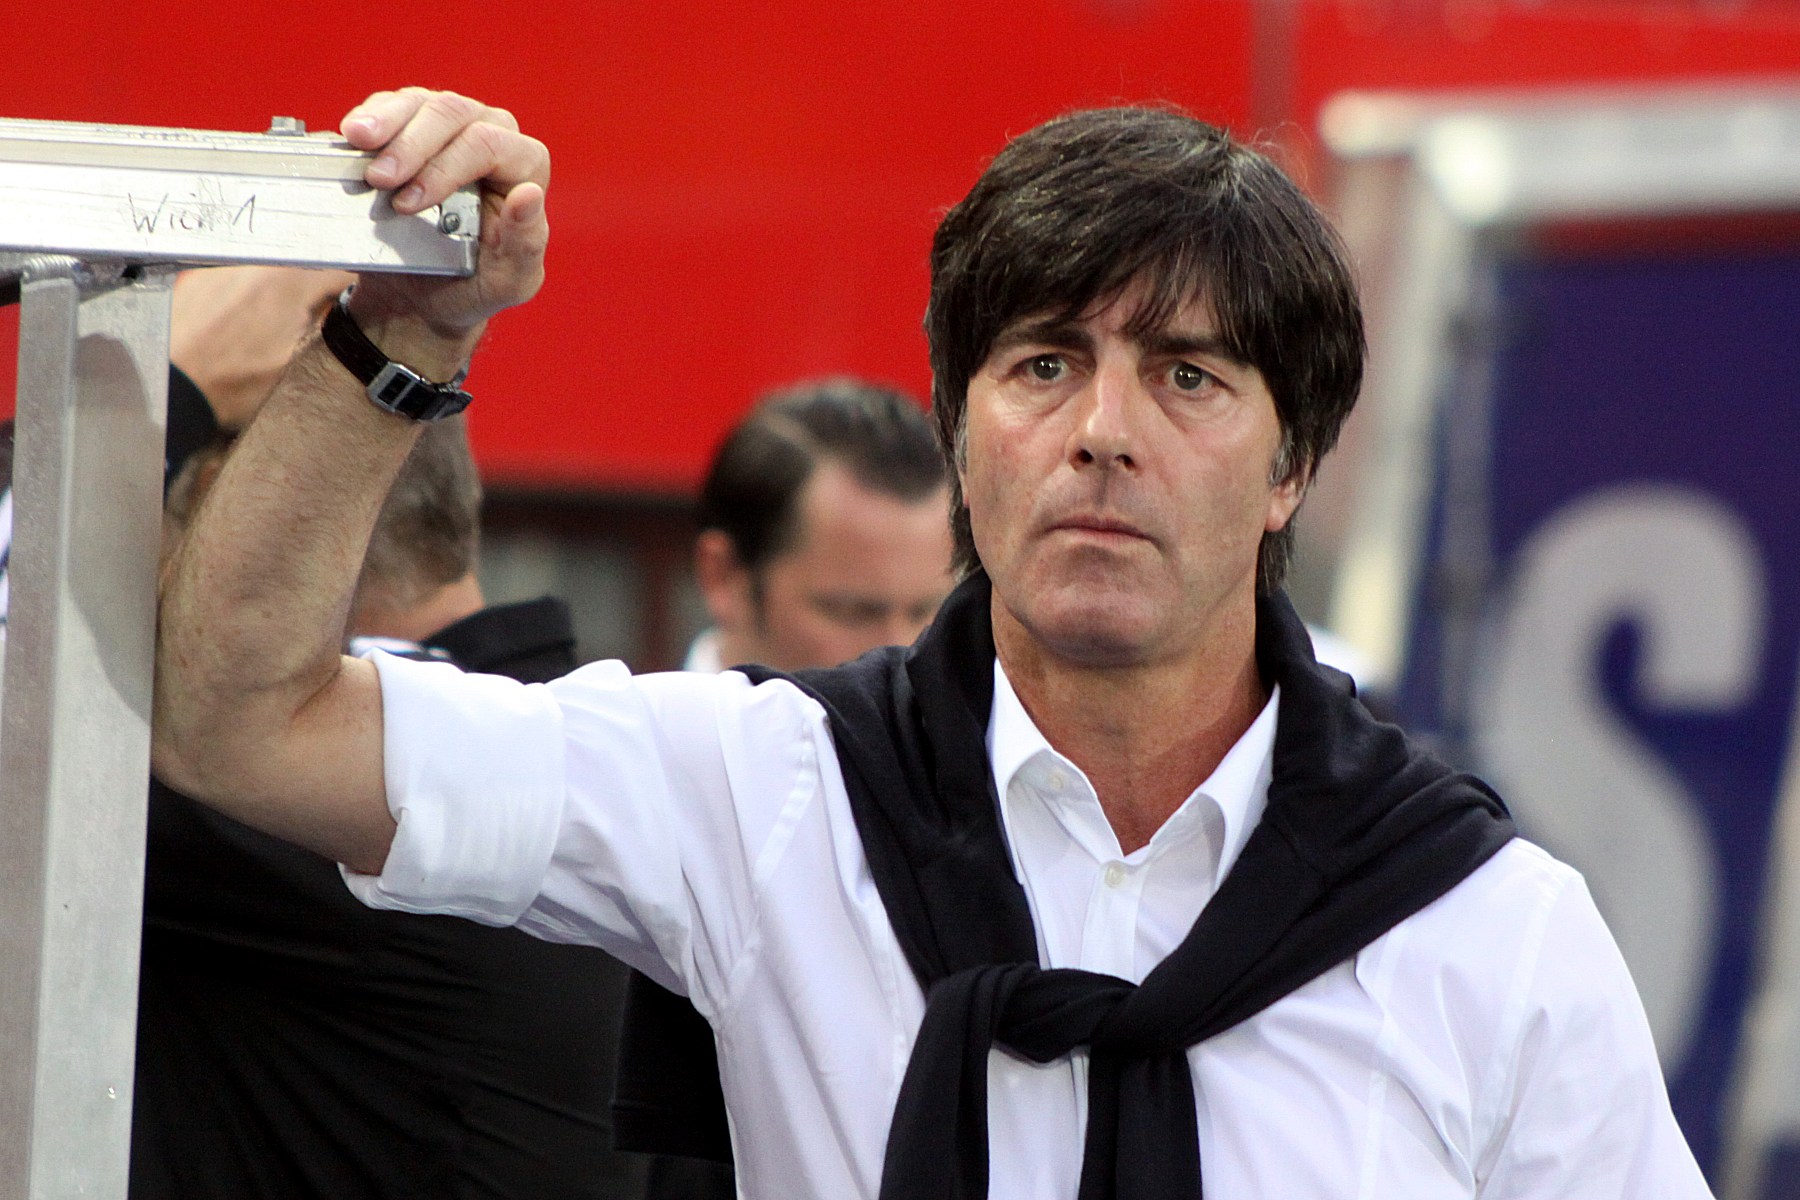 J. Löw (Joachim Löw) Biography, Date Of Birth, Career, Achievements, Goals And Many More..., J. Löw (Joachim Löw) Biography, Date Of Birth, Career, Achievements, Goals And Many More&#8230;